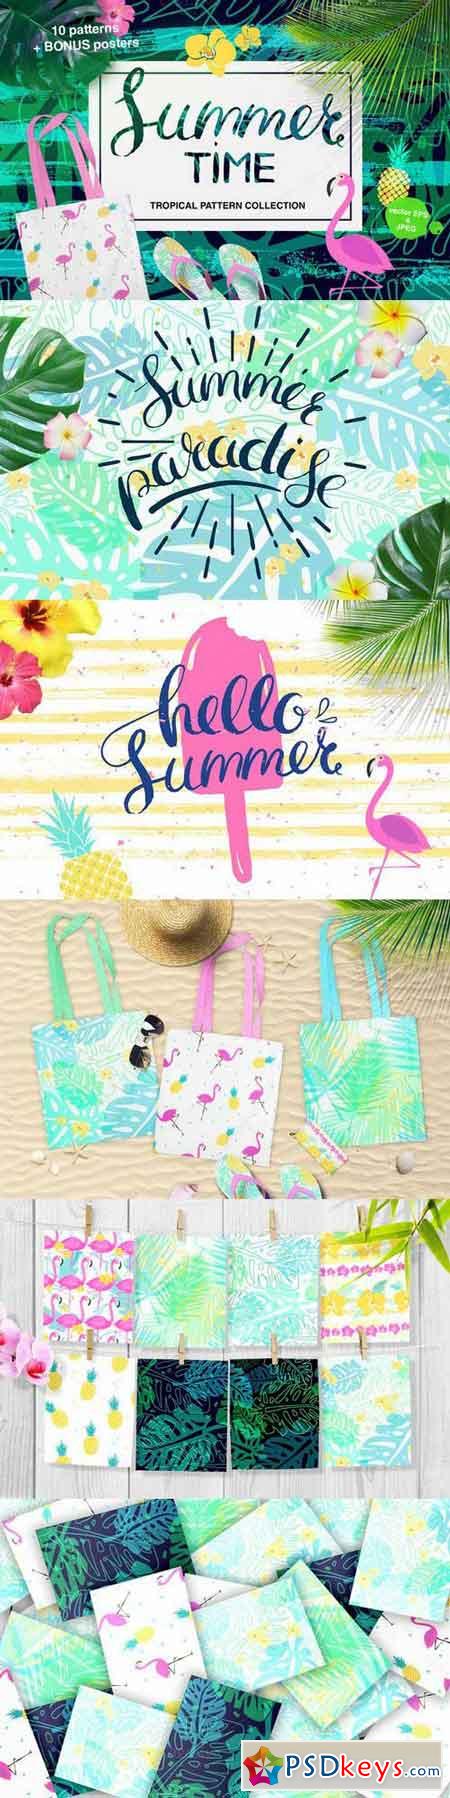 Summertime set of tropical patterns 694036